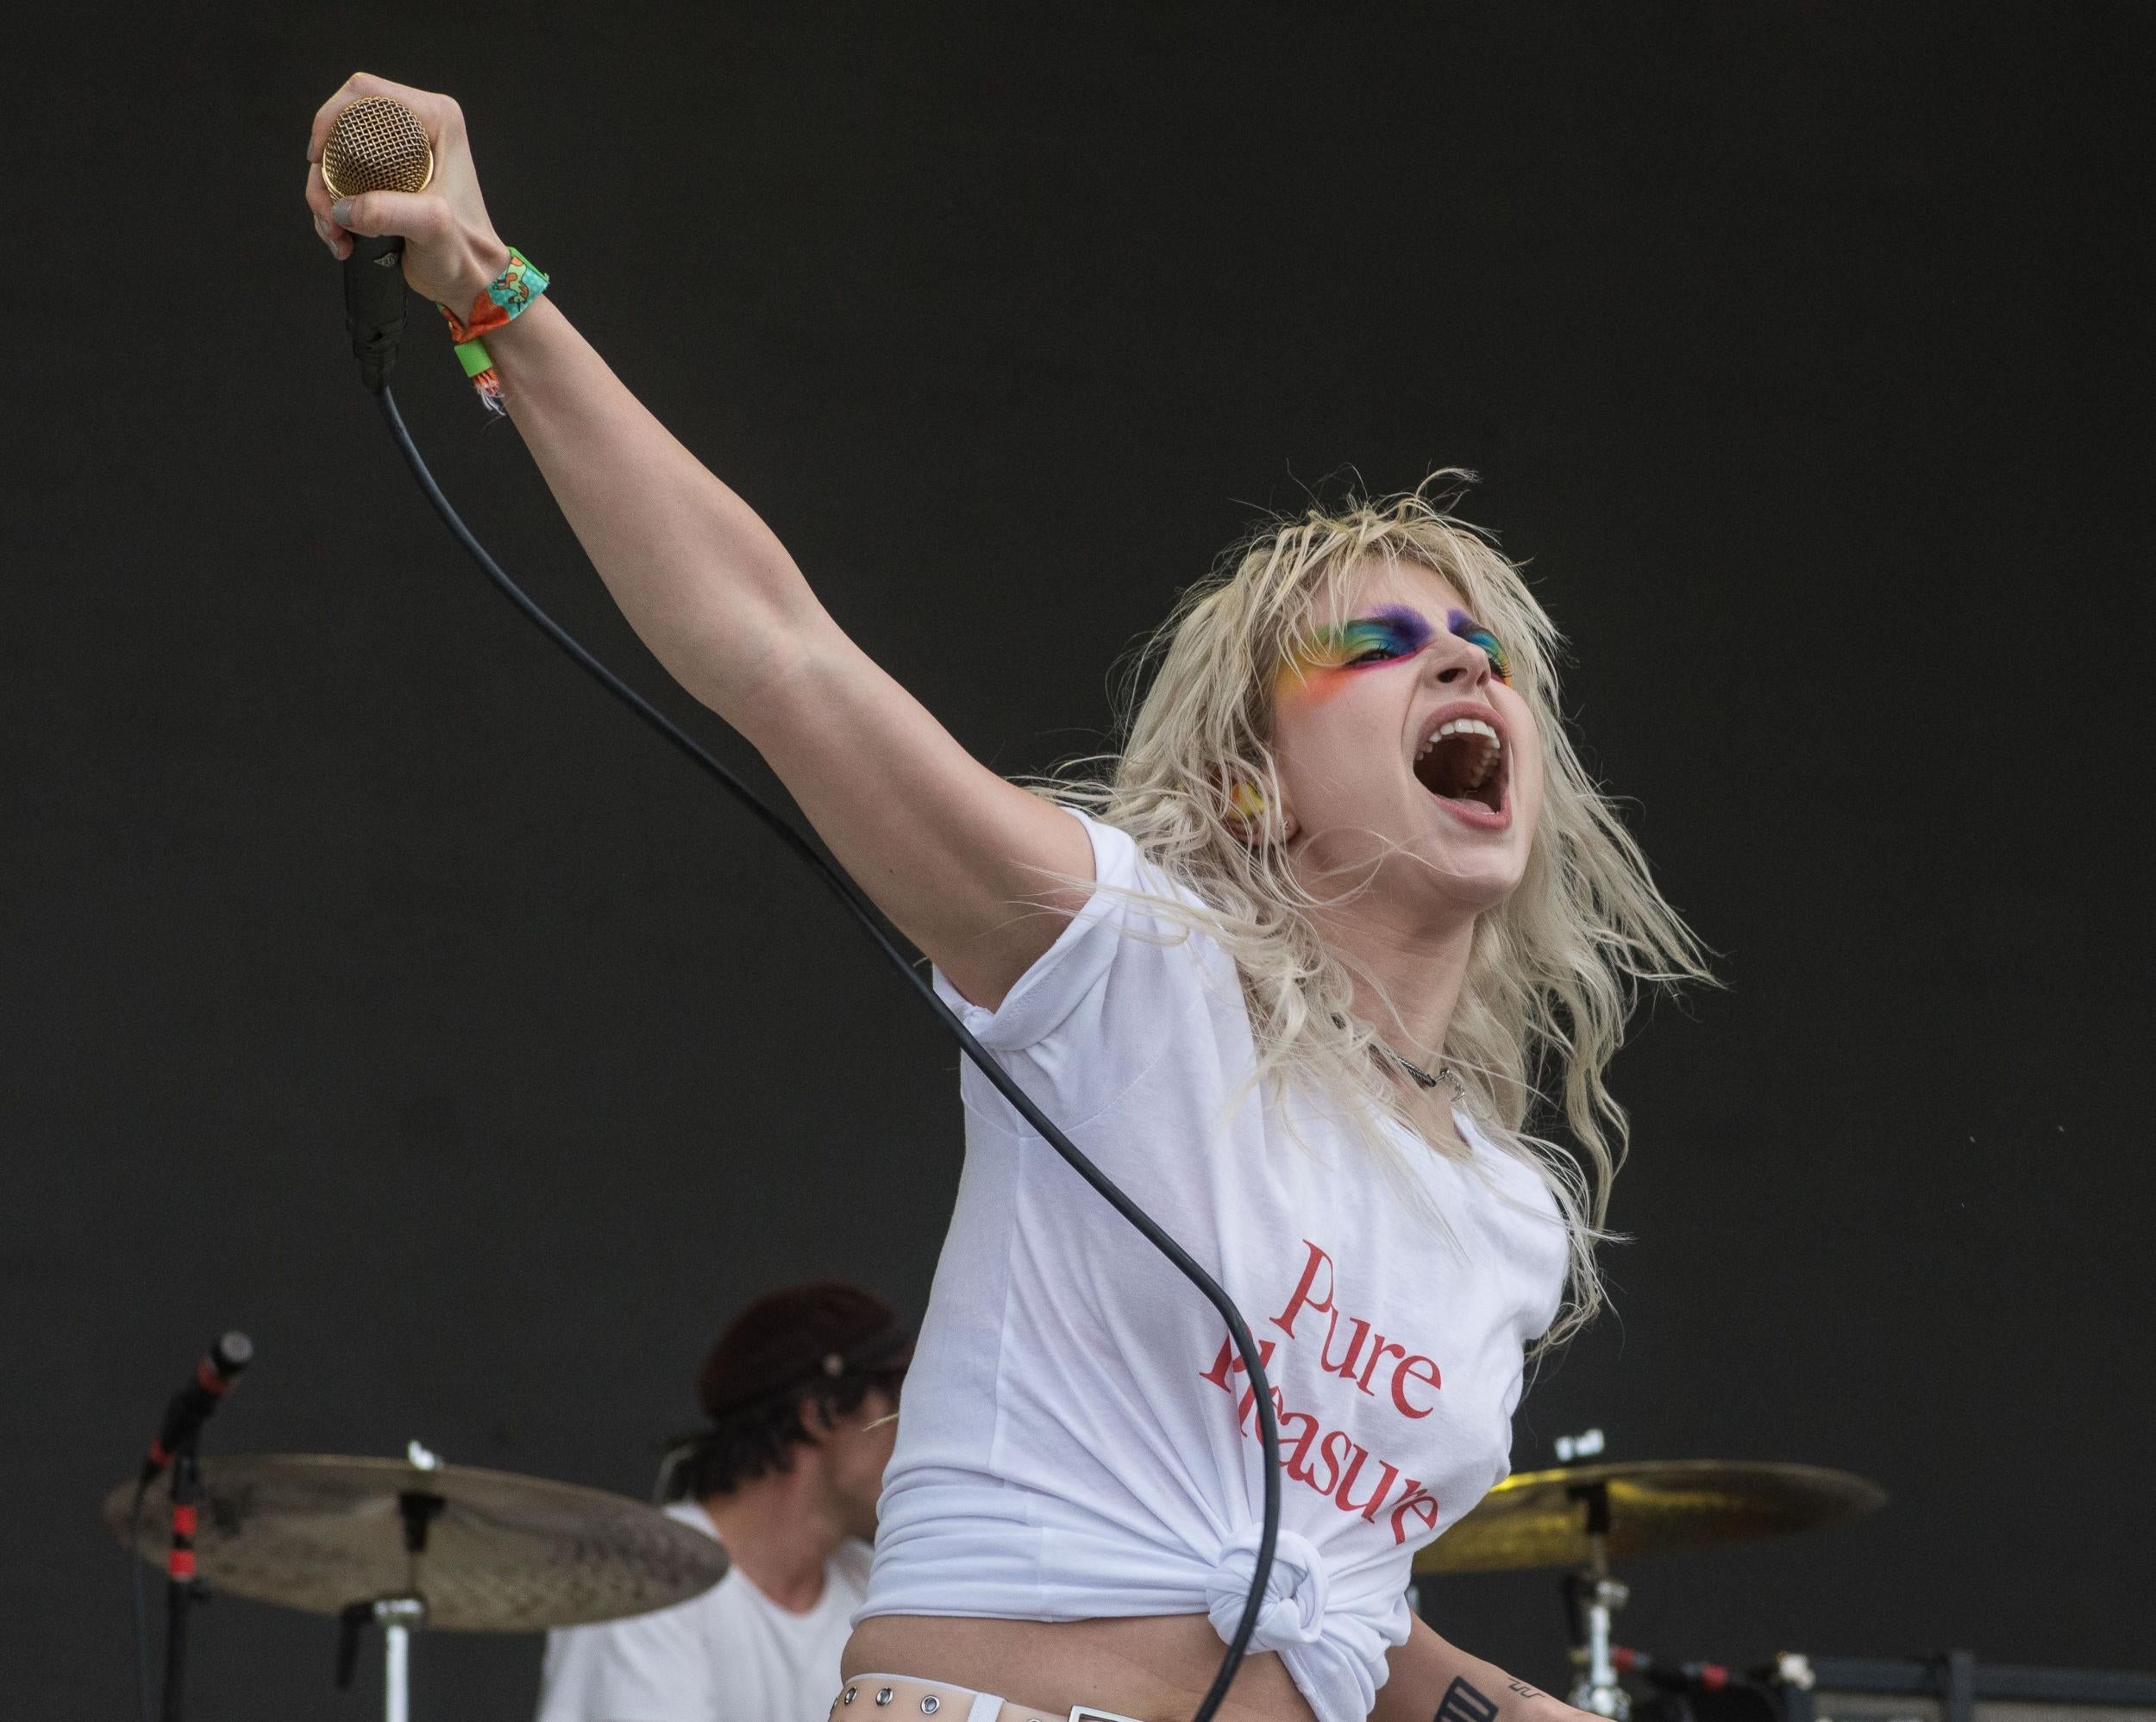 Hayley Williams Celebrates 10 Years of Paramore Self-Titled Album